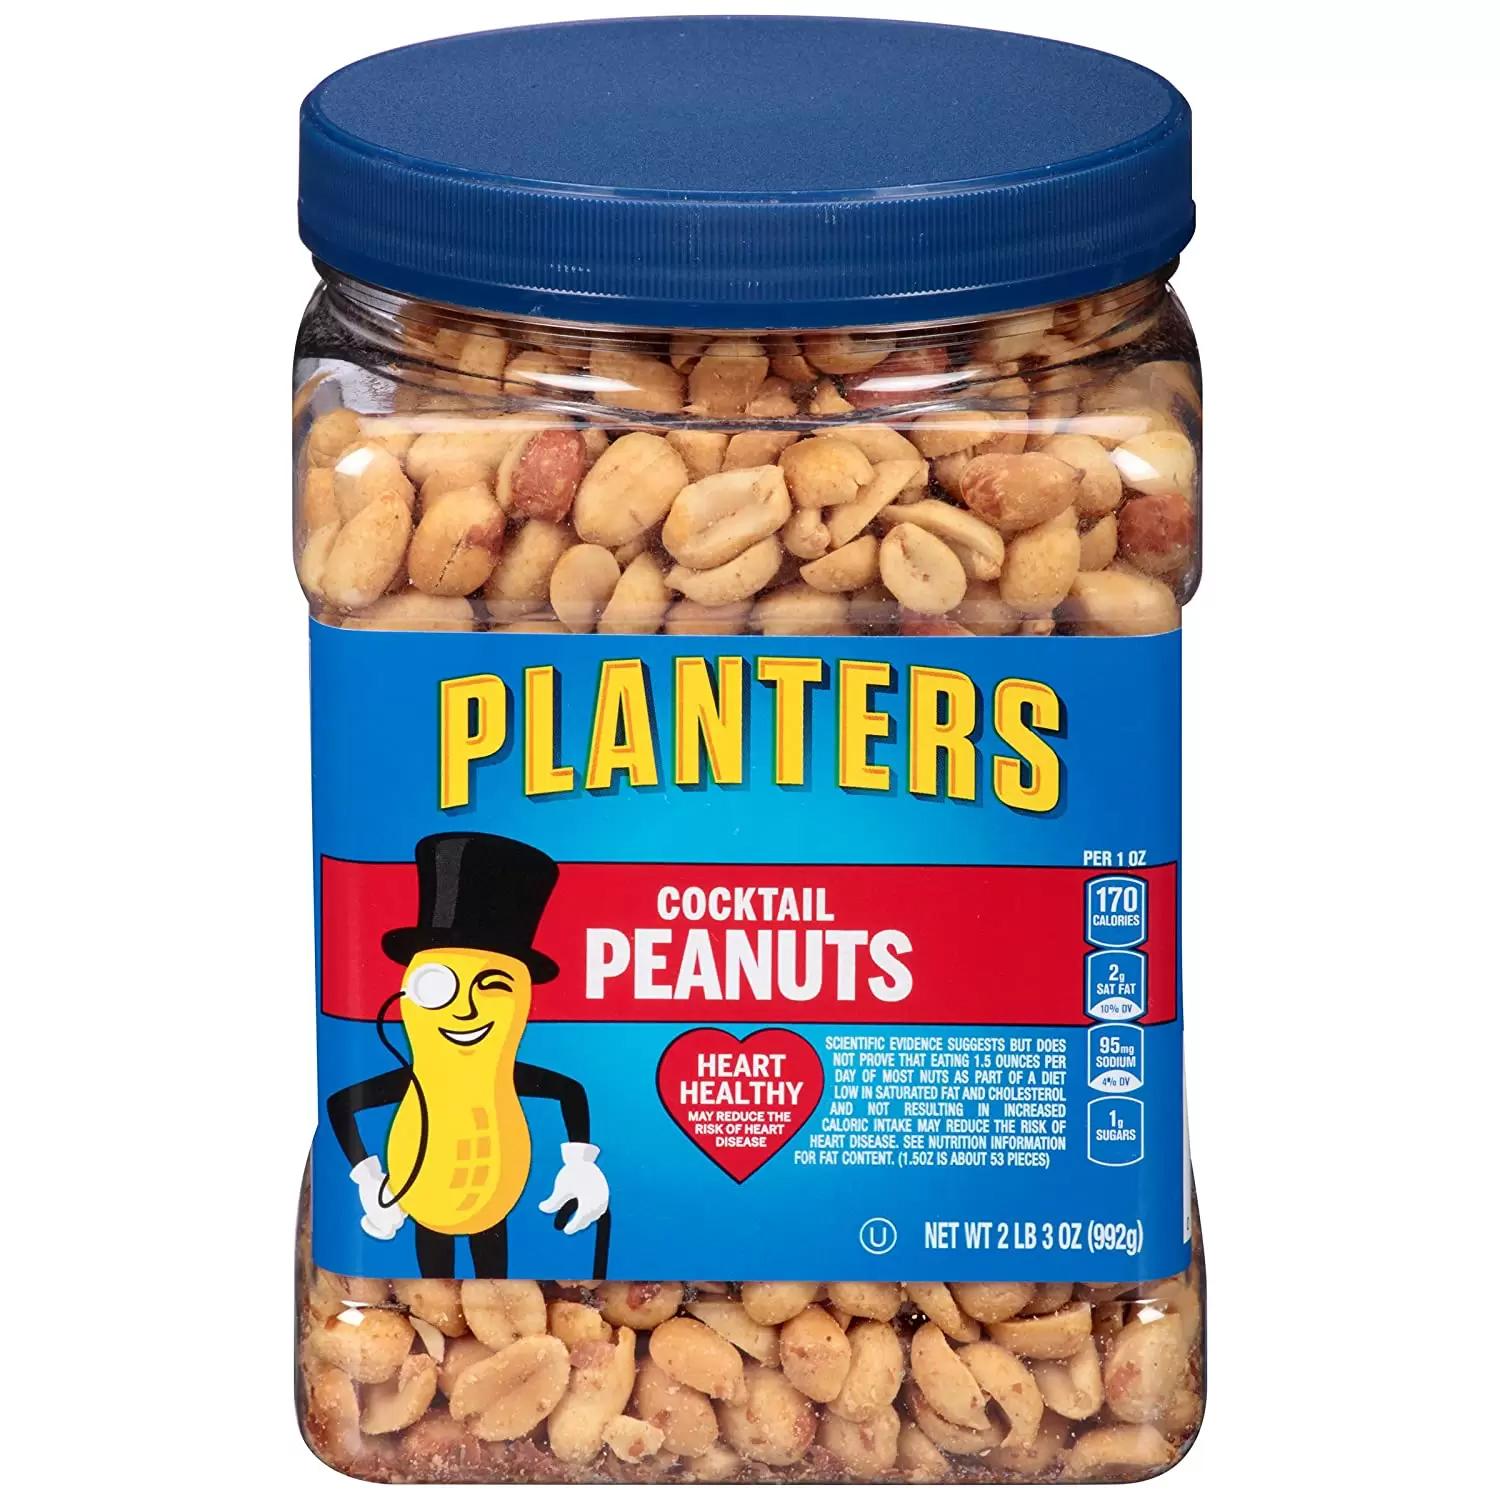 35-Ounce Planters Salted Cocktail Peanuts for $4.32 Shipped